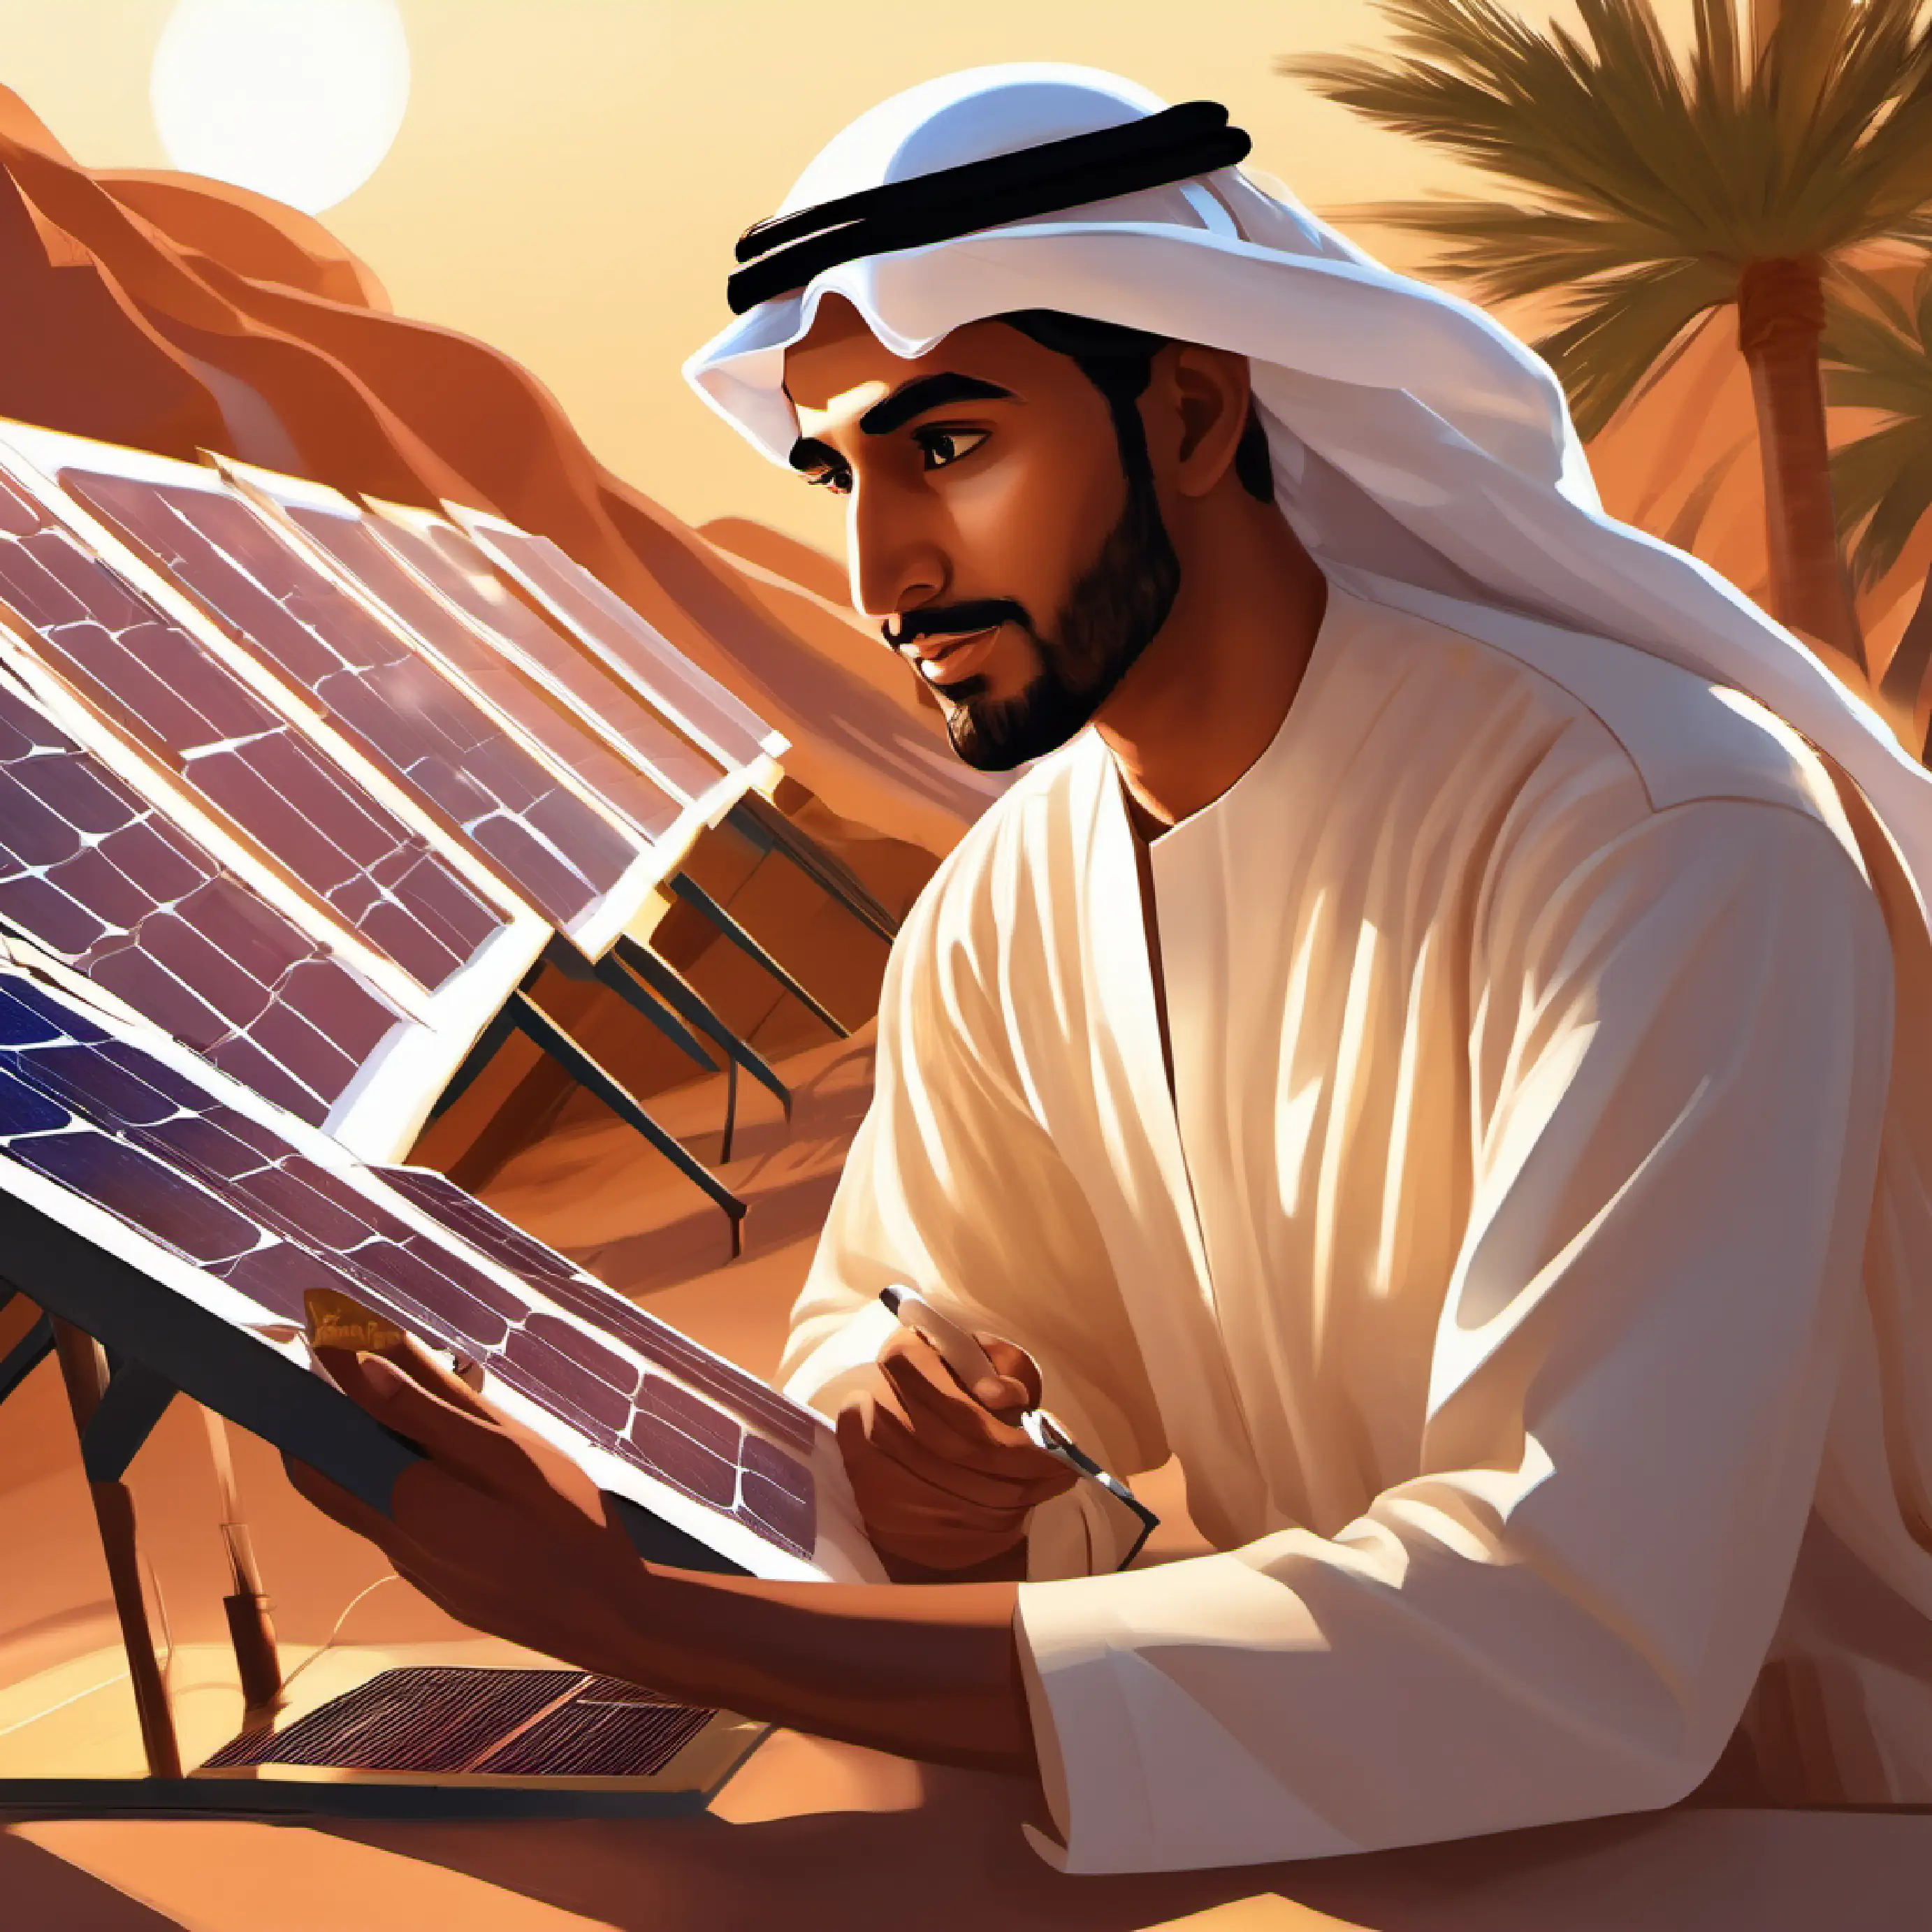 Young Emirati man, bronze skin, earnest dark eyes, with a scientific gaze working on a plan for harnessing solar energy.